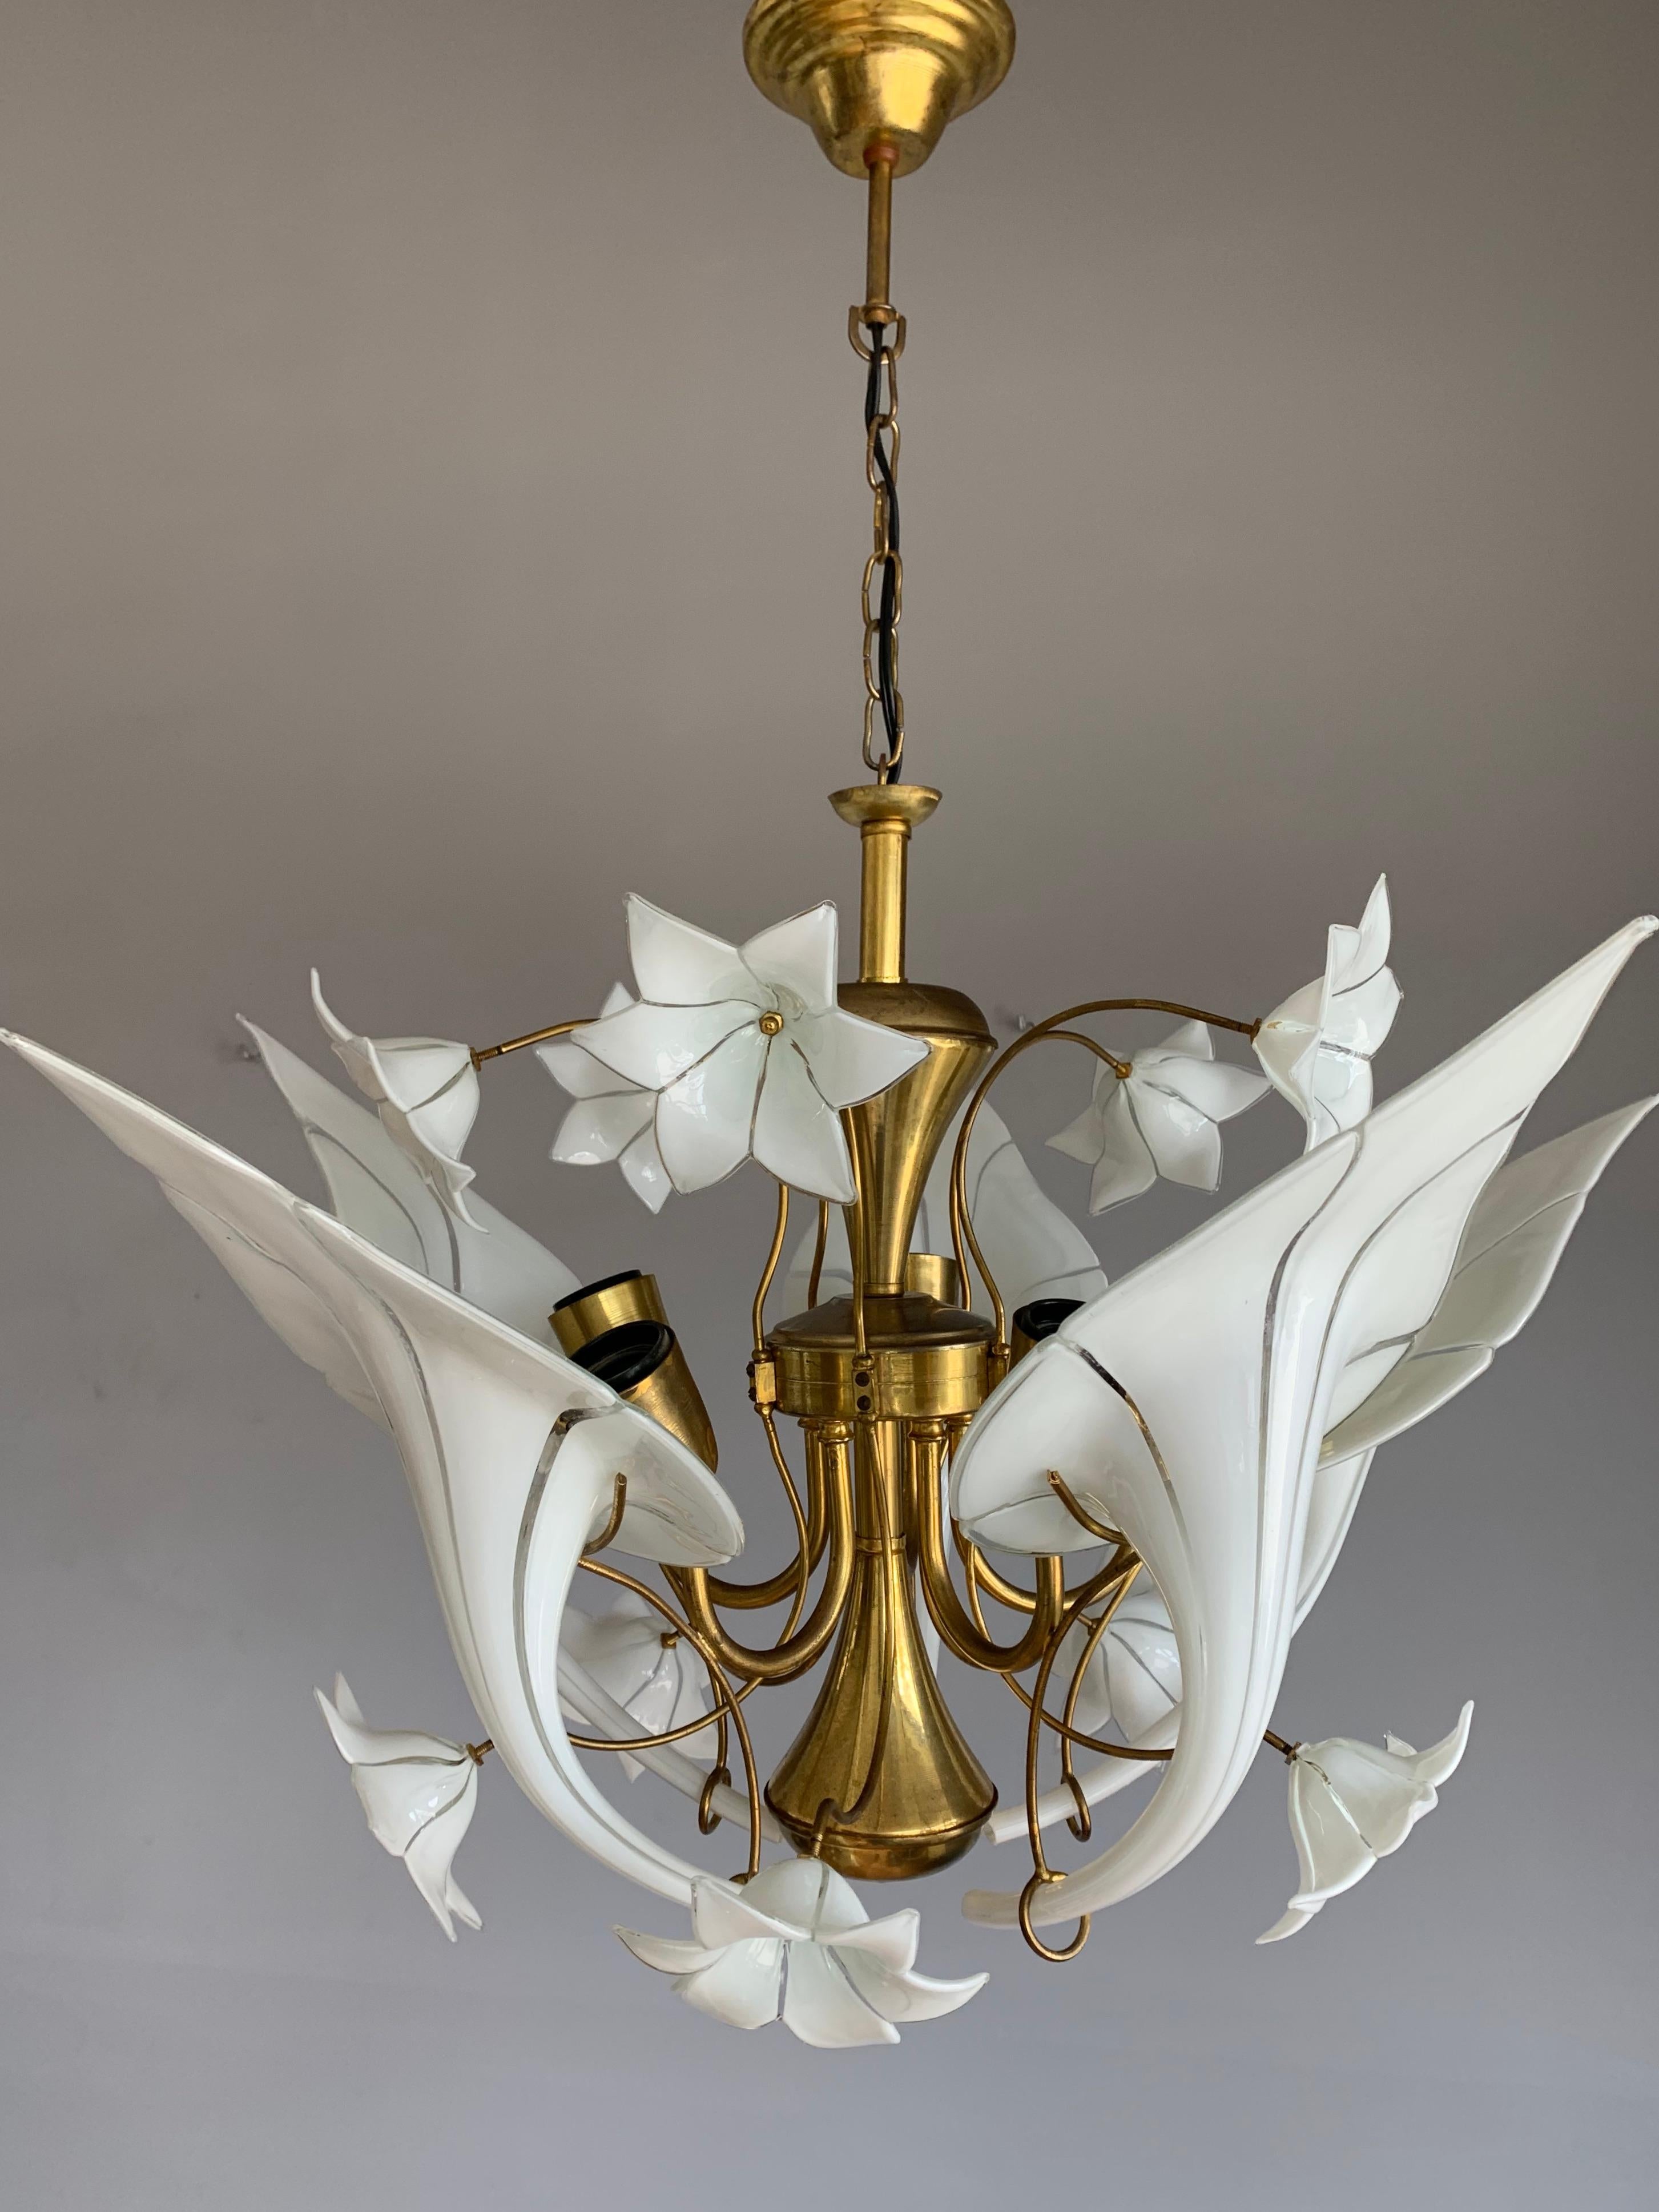 Mouth blown art glass in gilt brass frame, flower bouquet design light fixture.

If you are looking for a striking and extraordinary light fixture to grace your living space then this, Italian work of lighting art could be the one for you. This